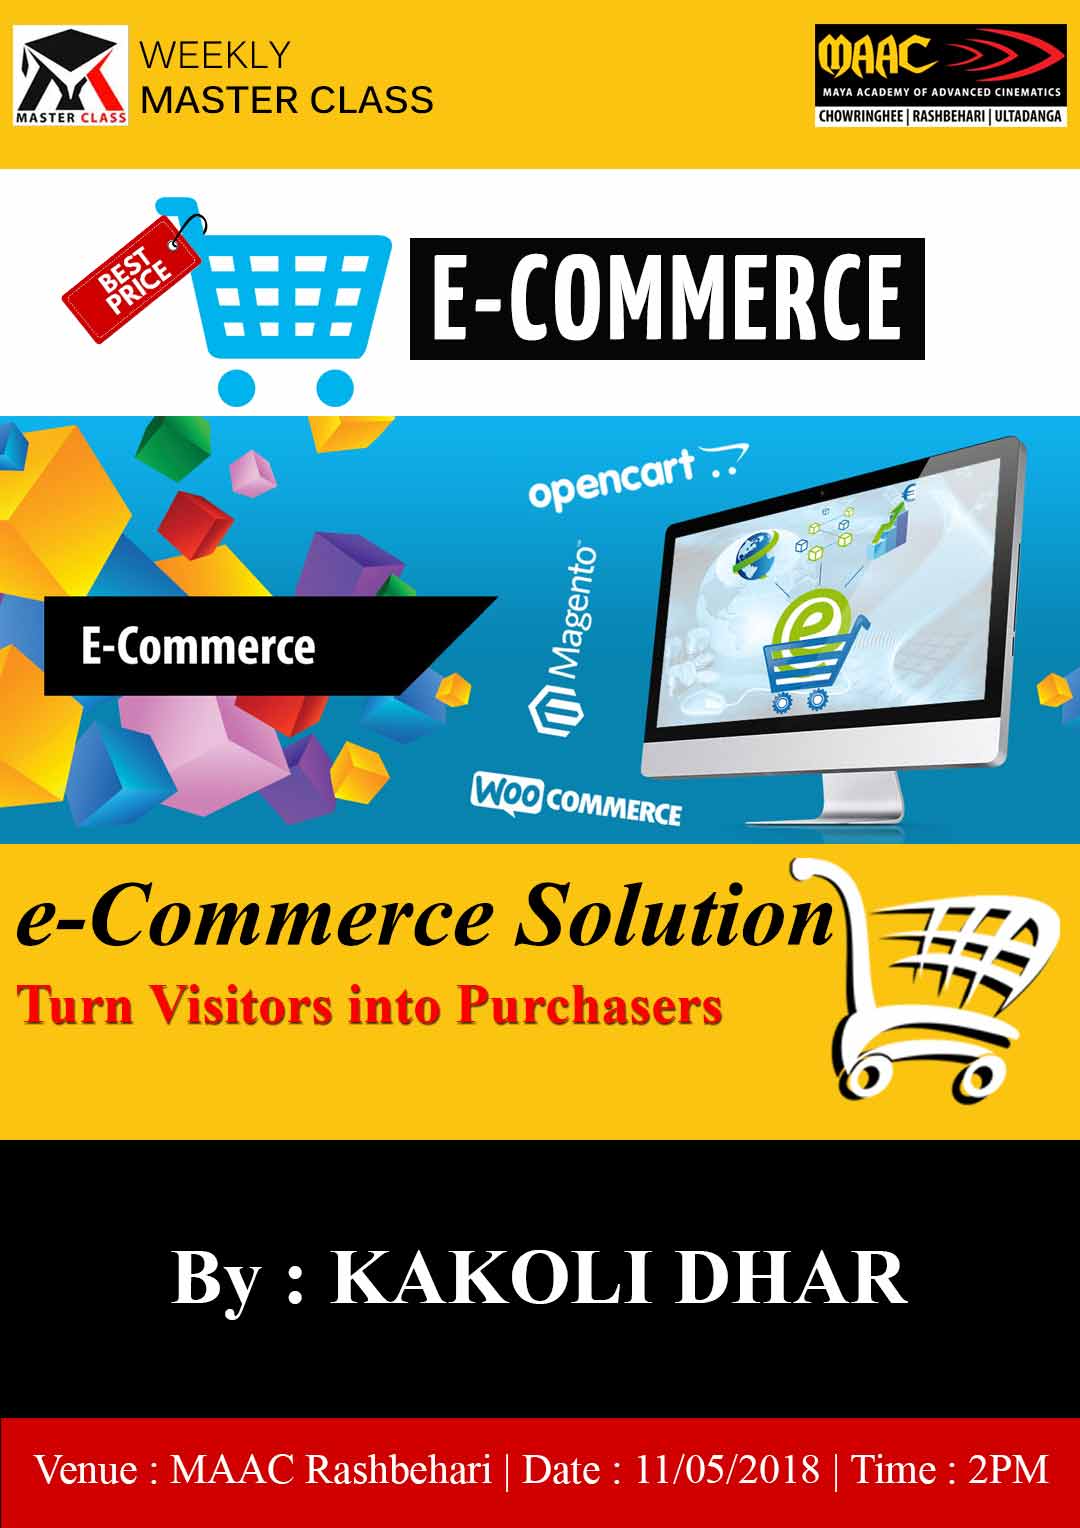 Weekly Master Class on E-Commerce Solution